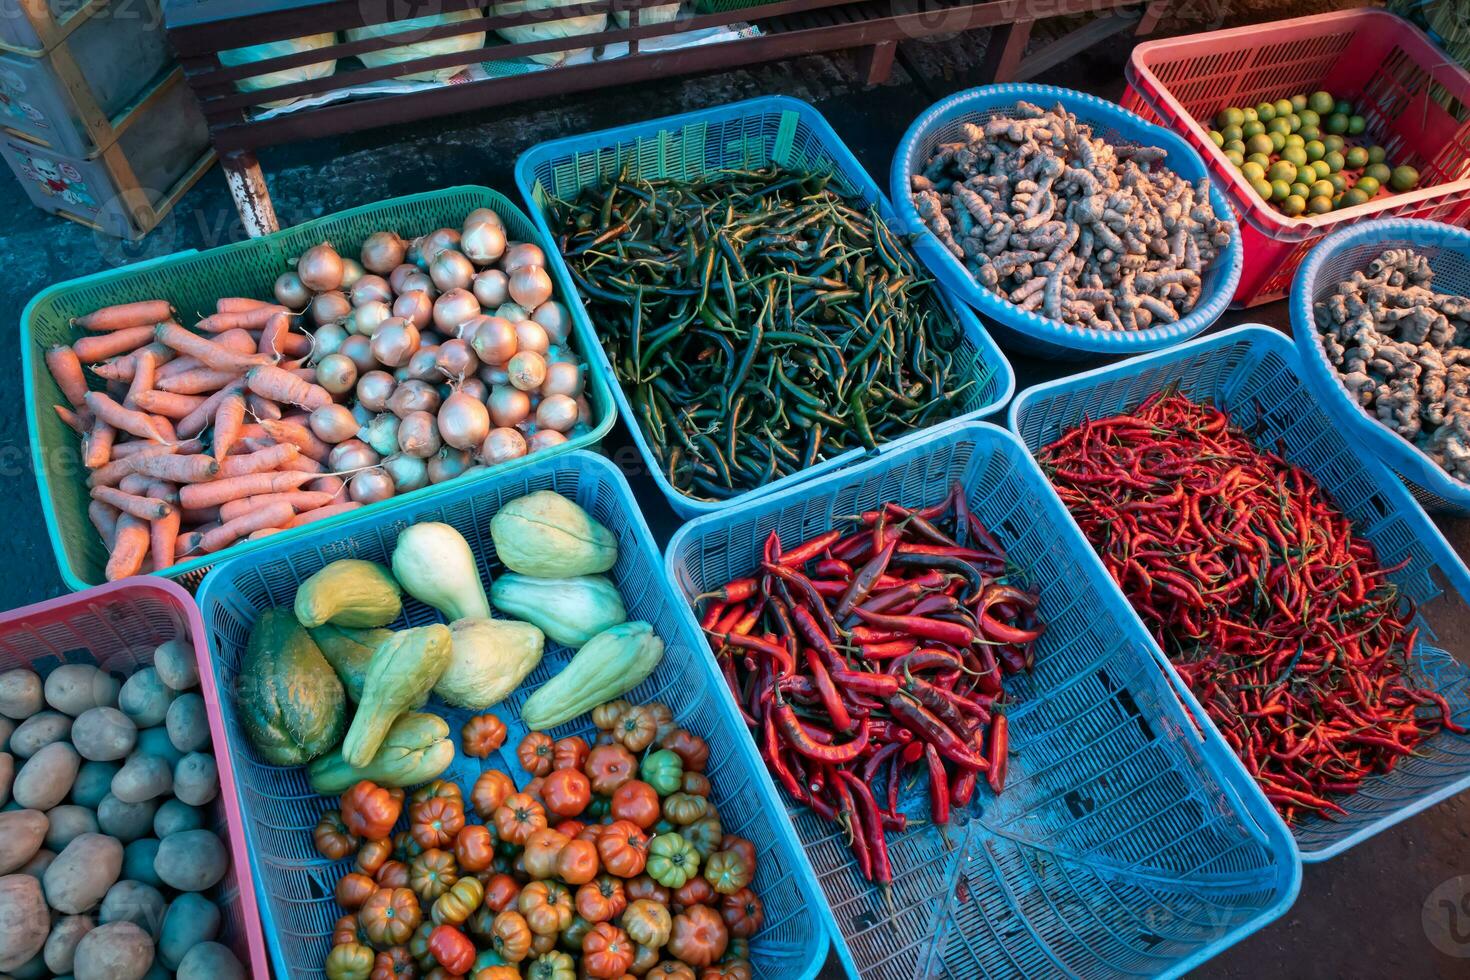 kitchen spices and vegetables on display at the traditional market photo